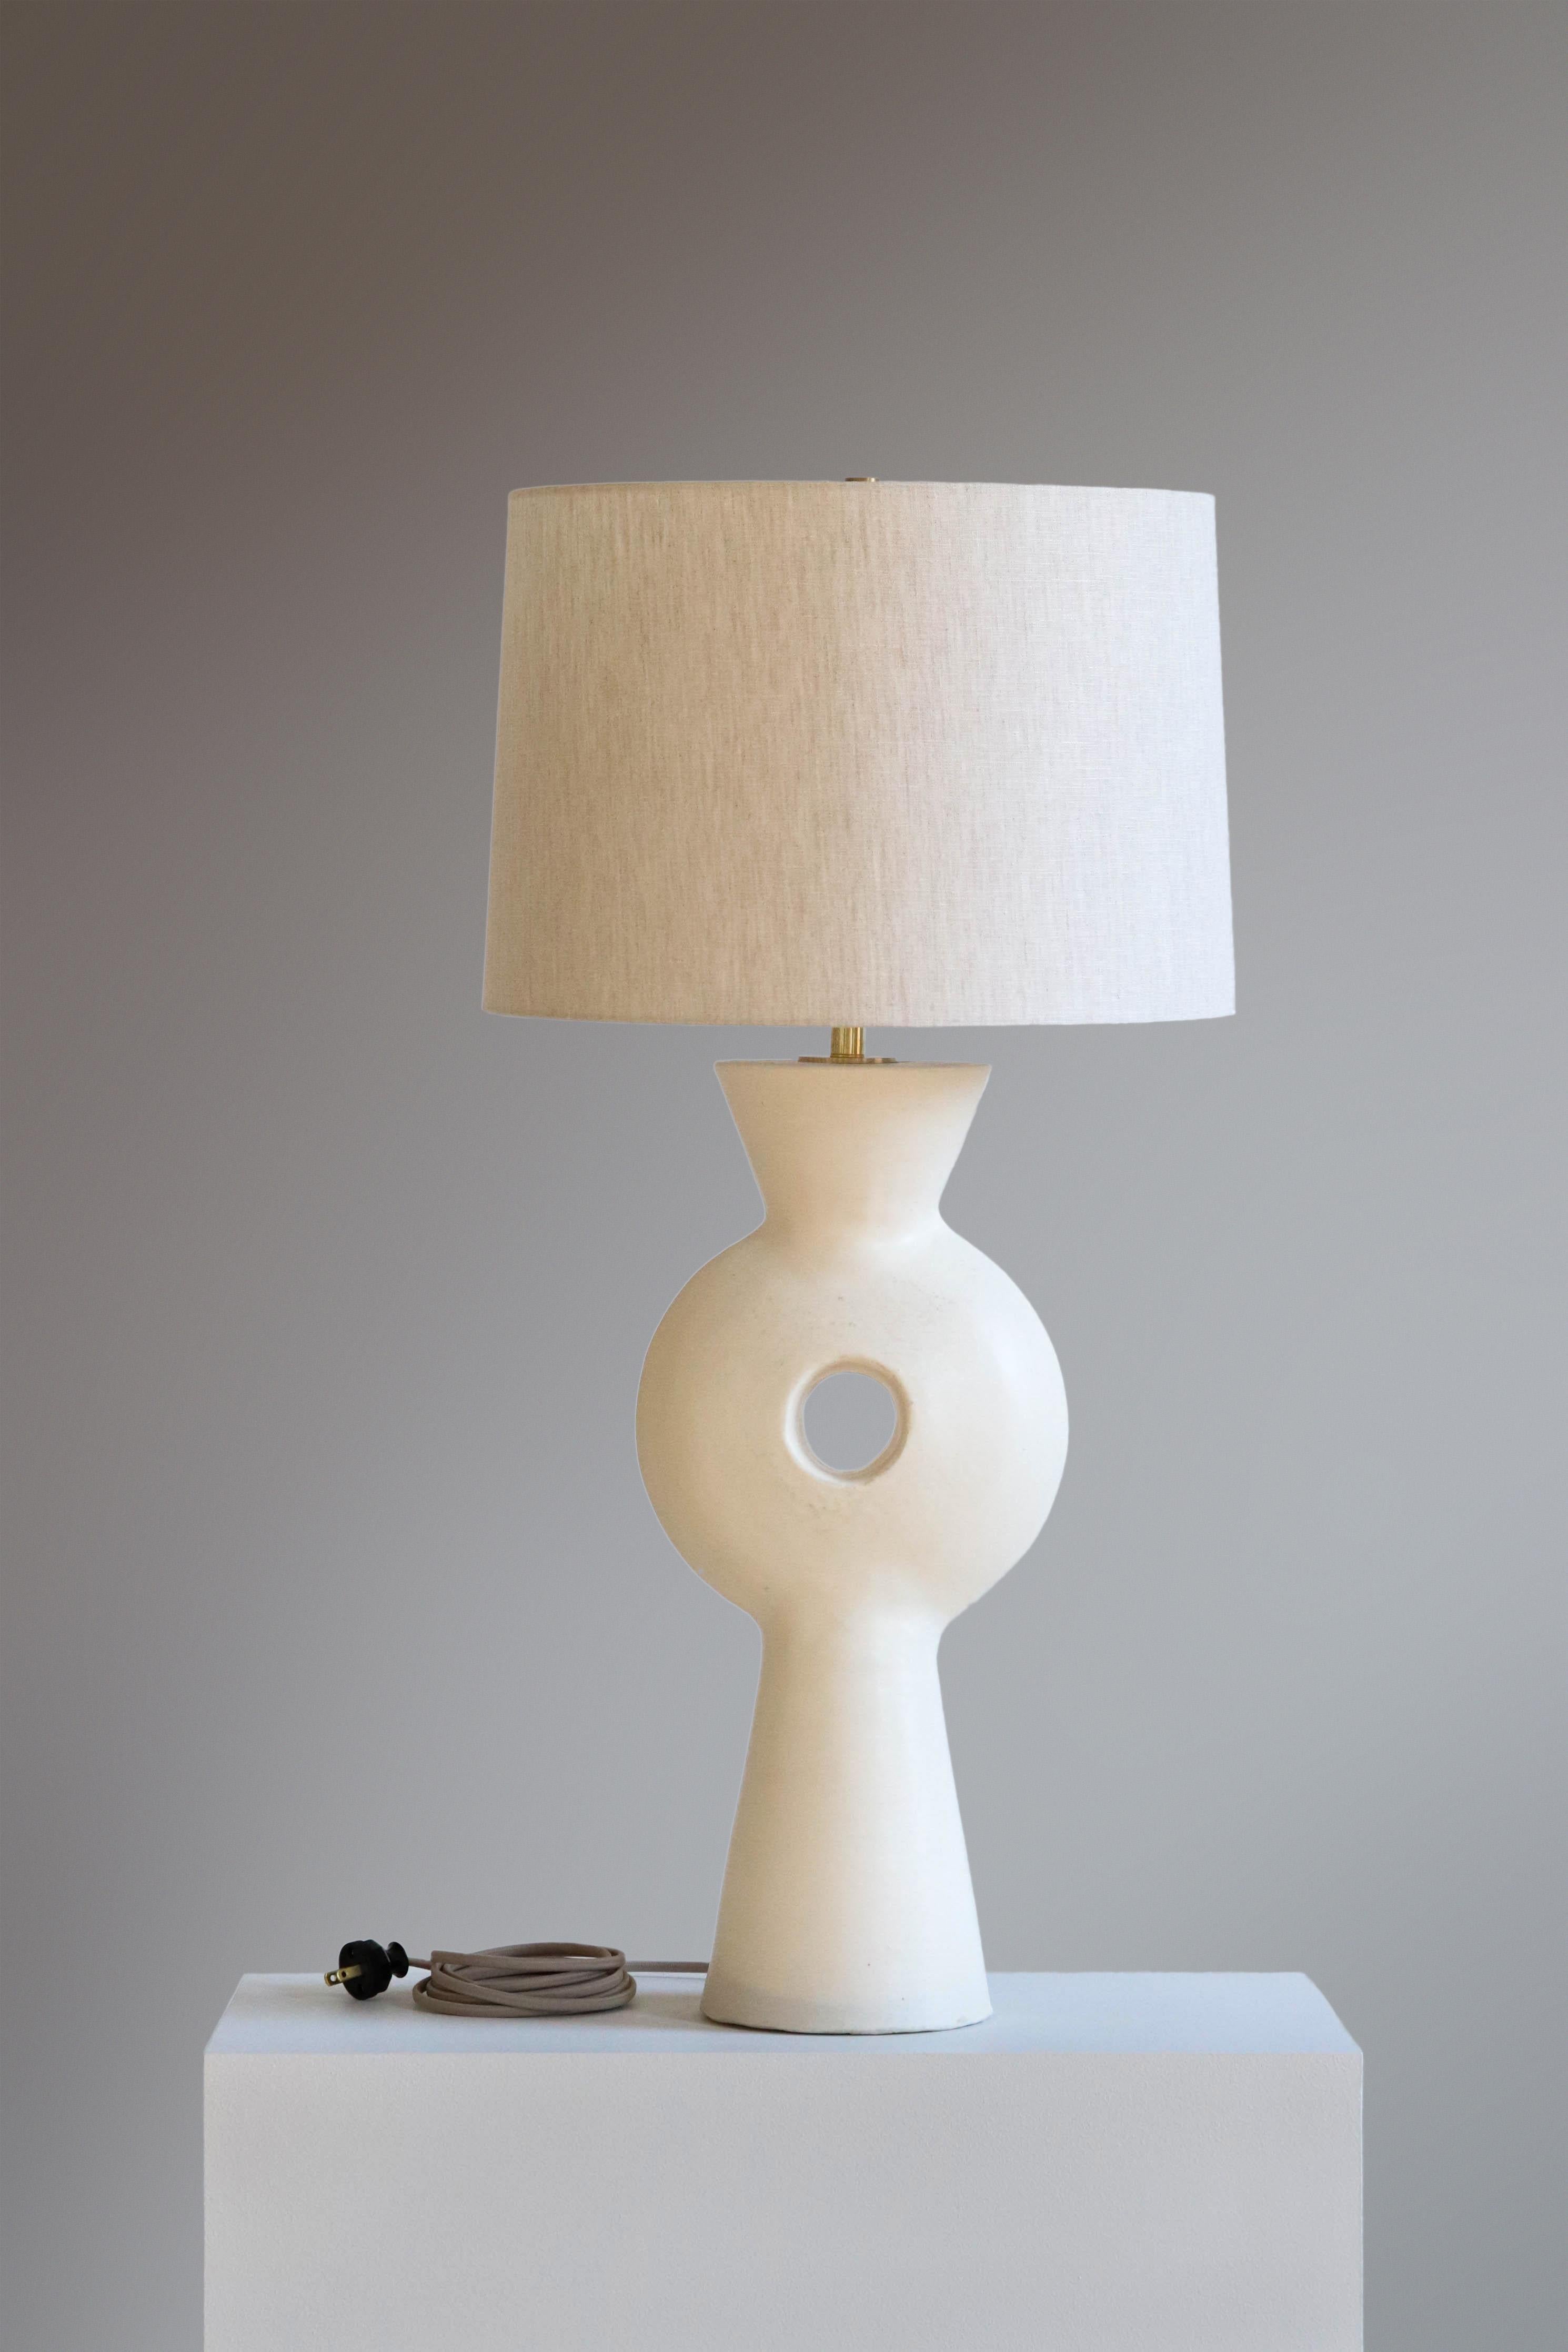 White Linus Table Lamp by Danny Kaplan Studio
Dimensions: ⌀ 41 x H 82 cm
Materials: Glazed Ceramic, Unfinished Brass, Linen

This item is handmade, and may exhibit variability within the same piece. We do our best to maintain a consistent product,